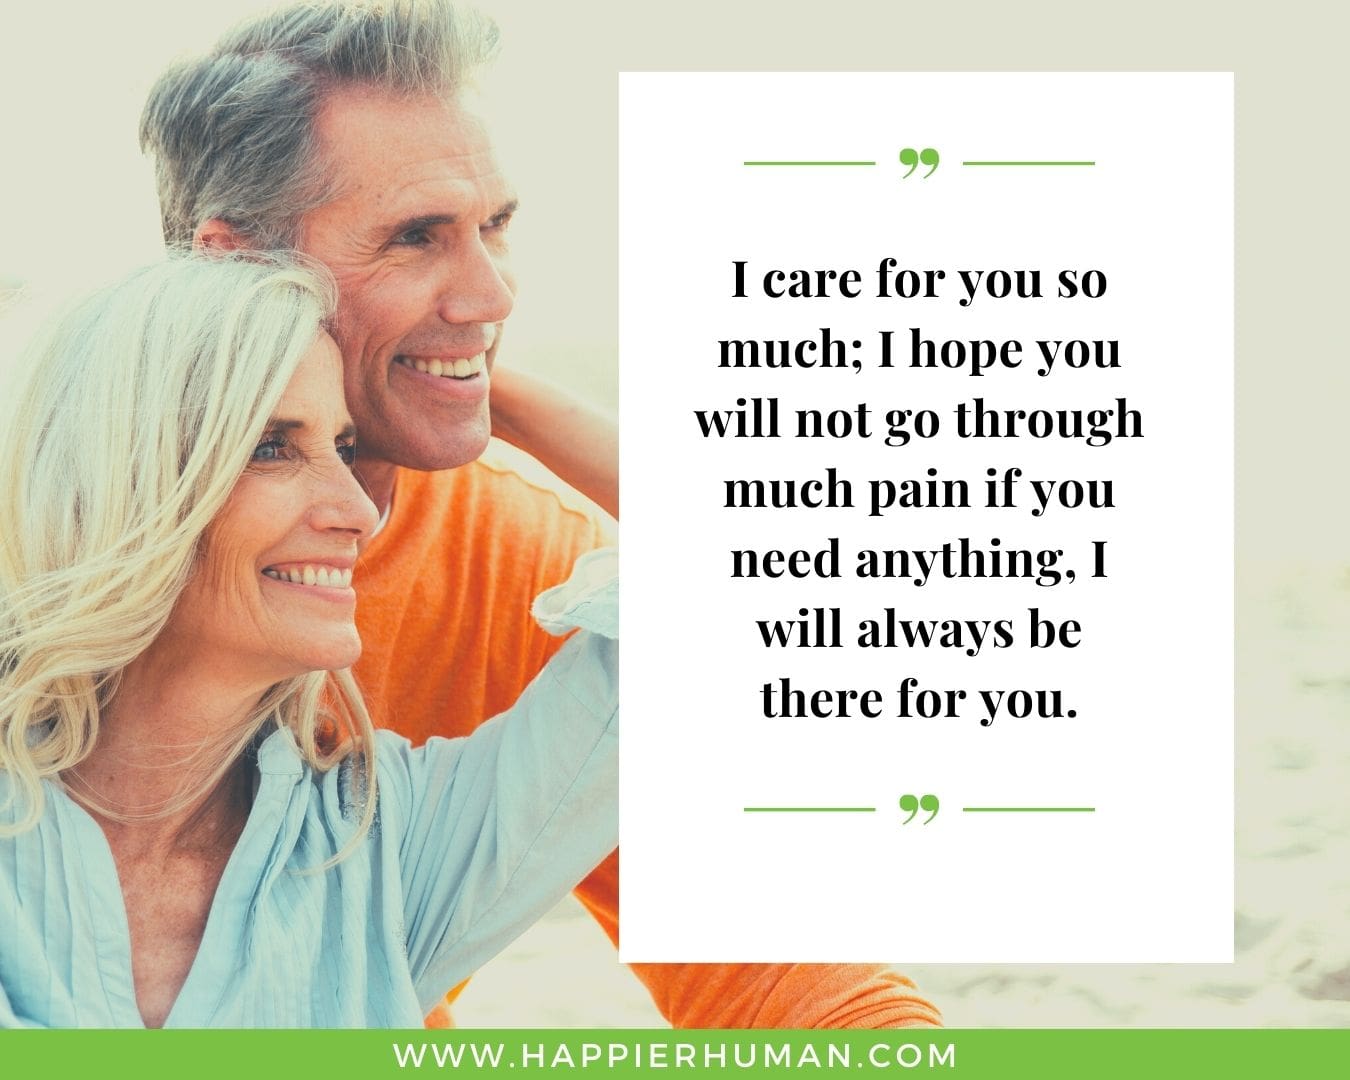 I’m Here for You Quotes - “I care for you so much; I hope you will not go through much pain if you need anything, I will always be there for you.”